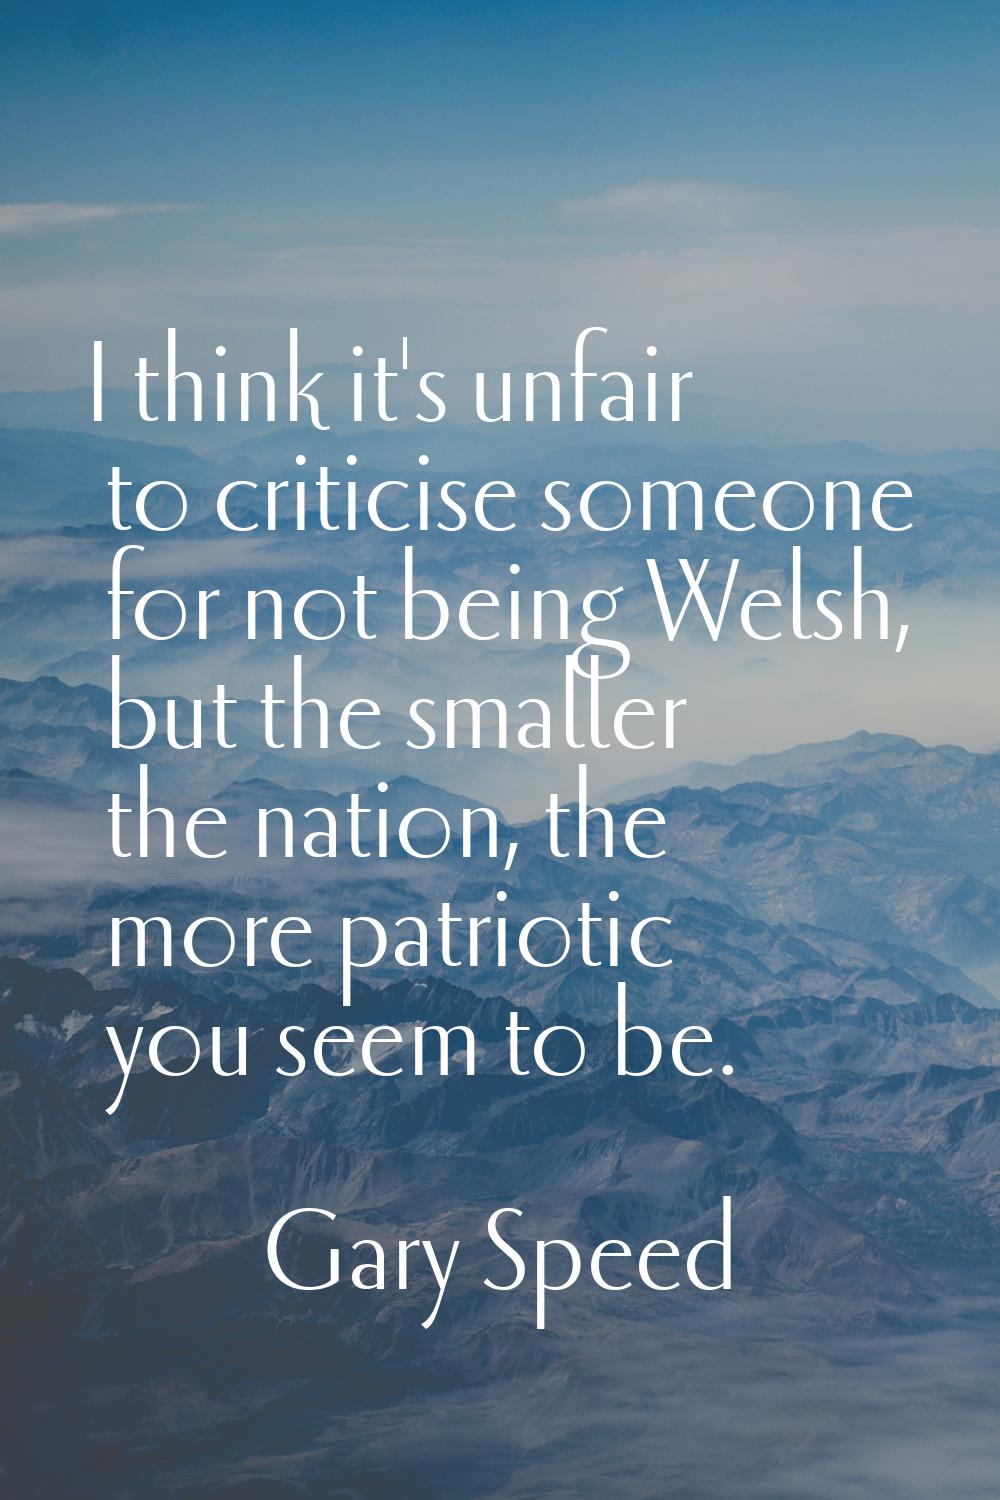 I think it's unfair to criticise someone for not being Welsh, but the smaller the nation, the more 